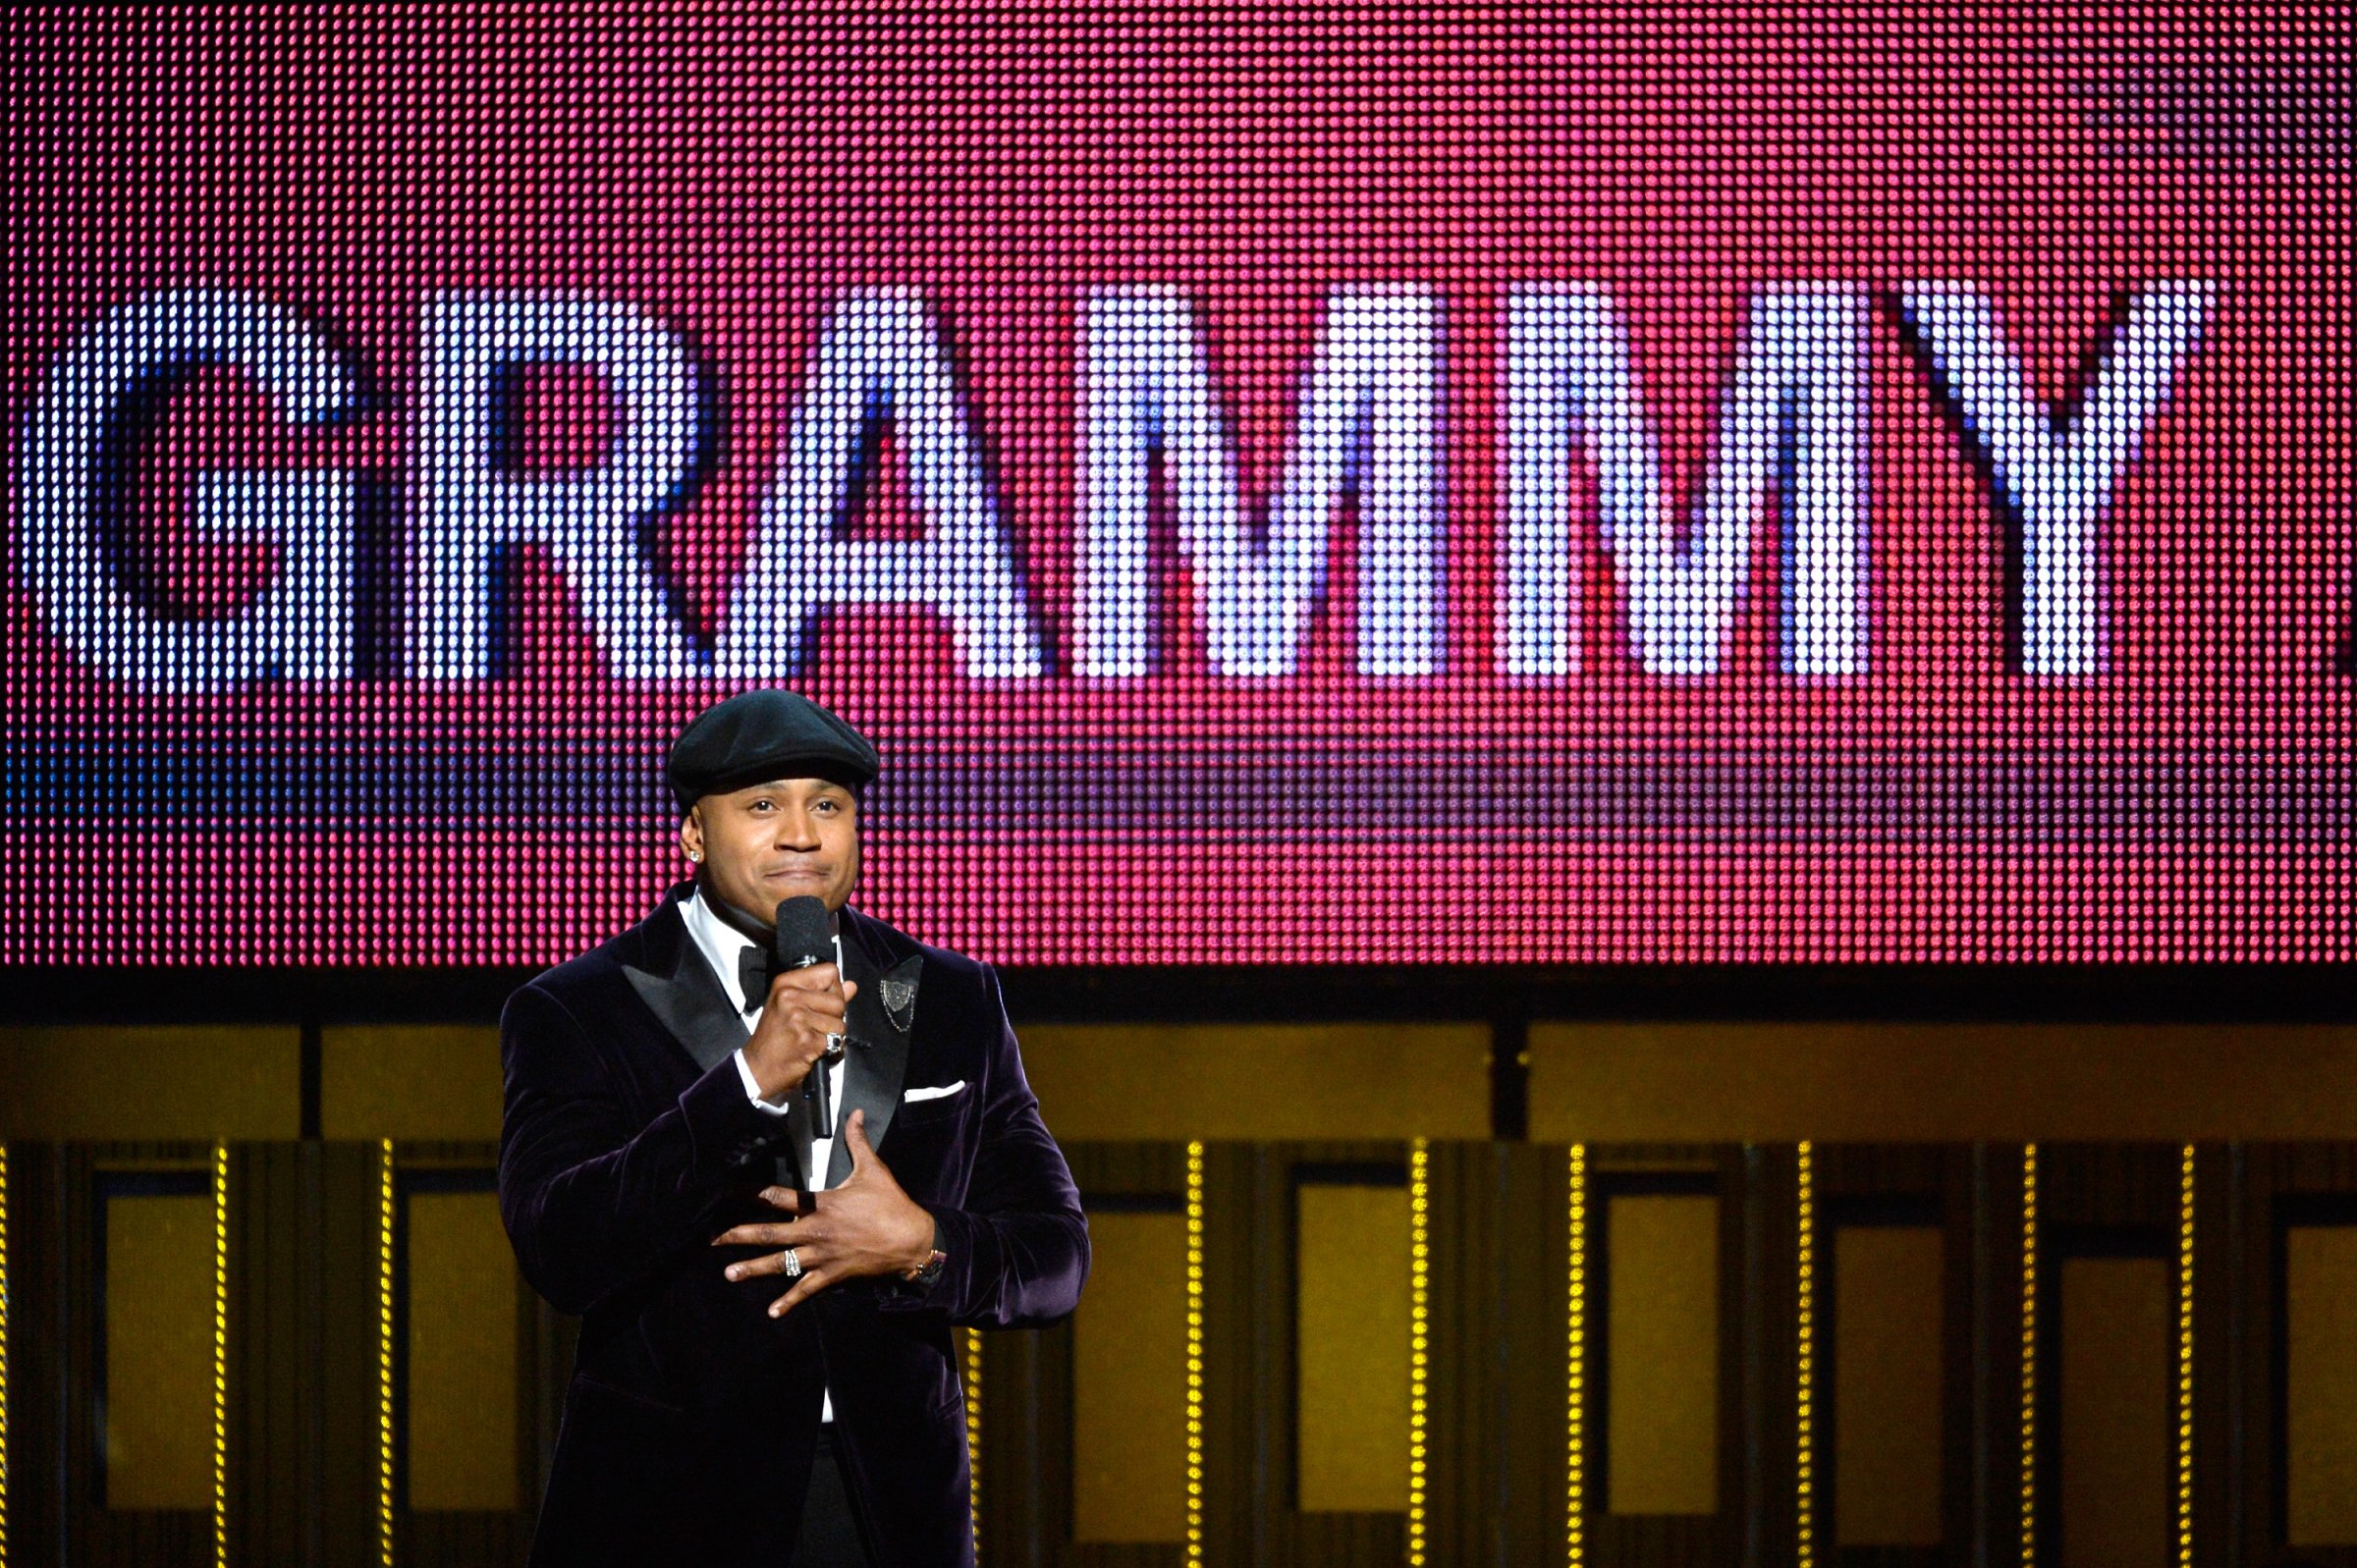 Host LL Cool J speaks onstage during the 56th GRAMMY Awards on Jan. 26, 2014 in Los Angeles, California.